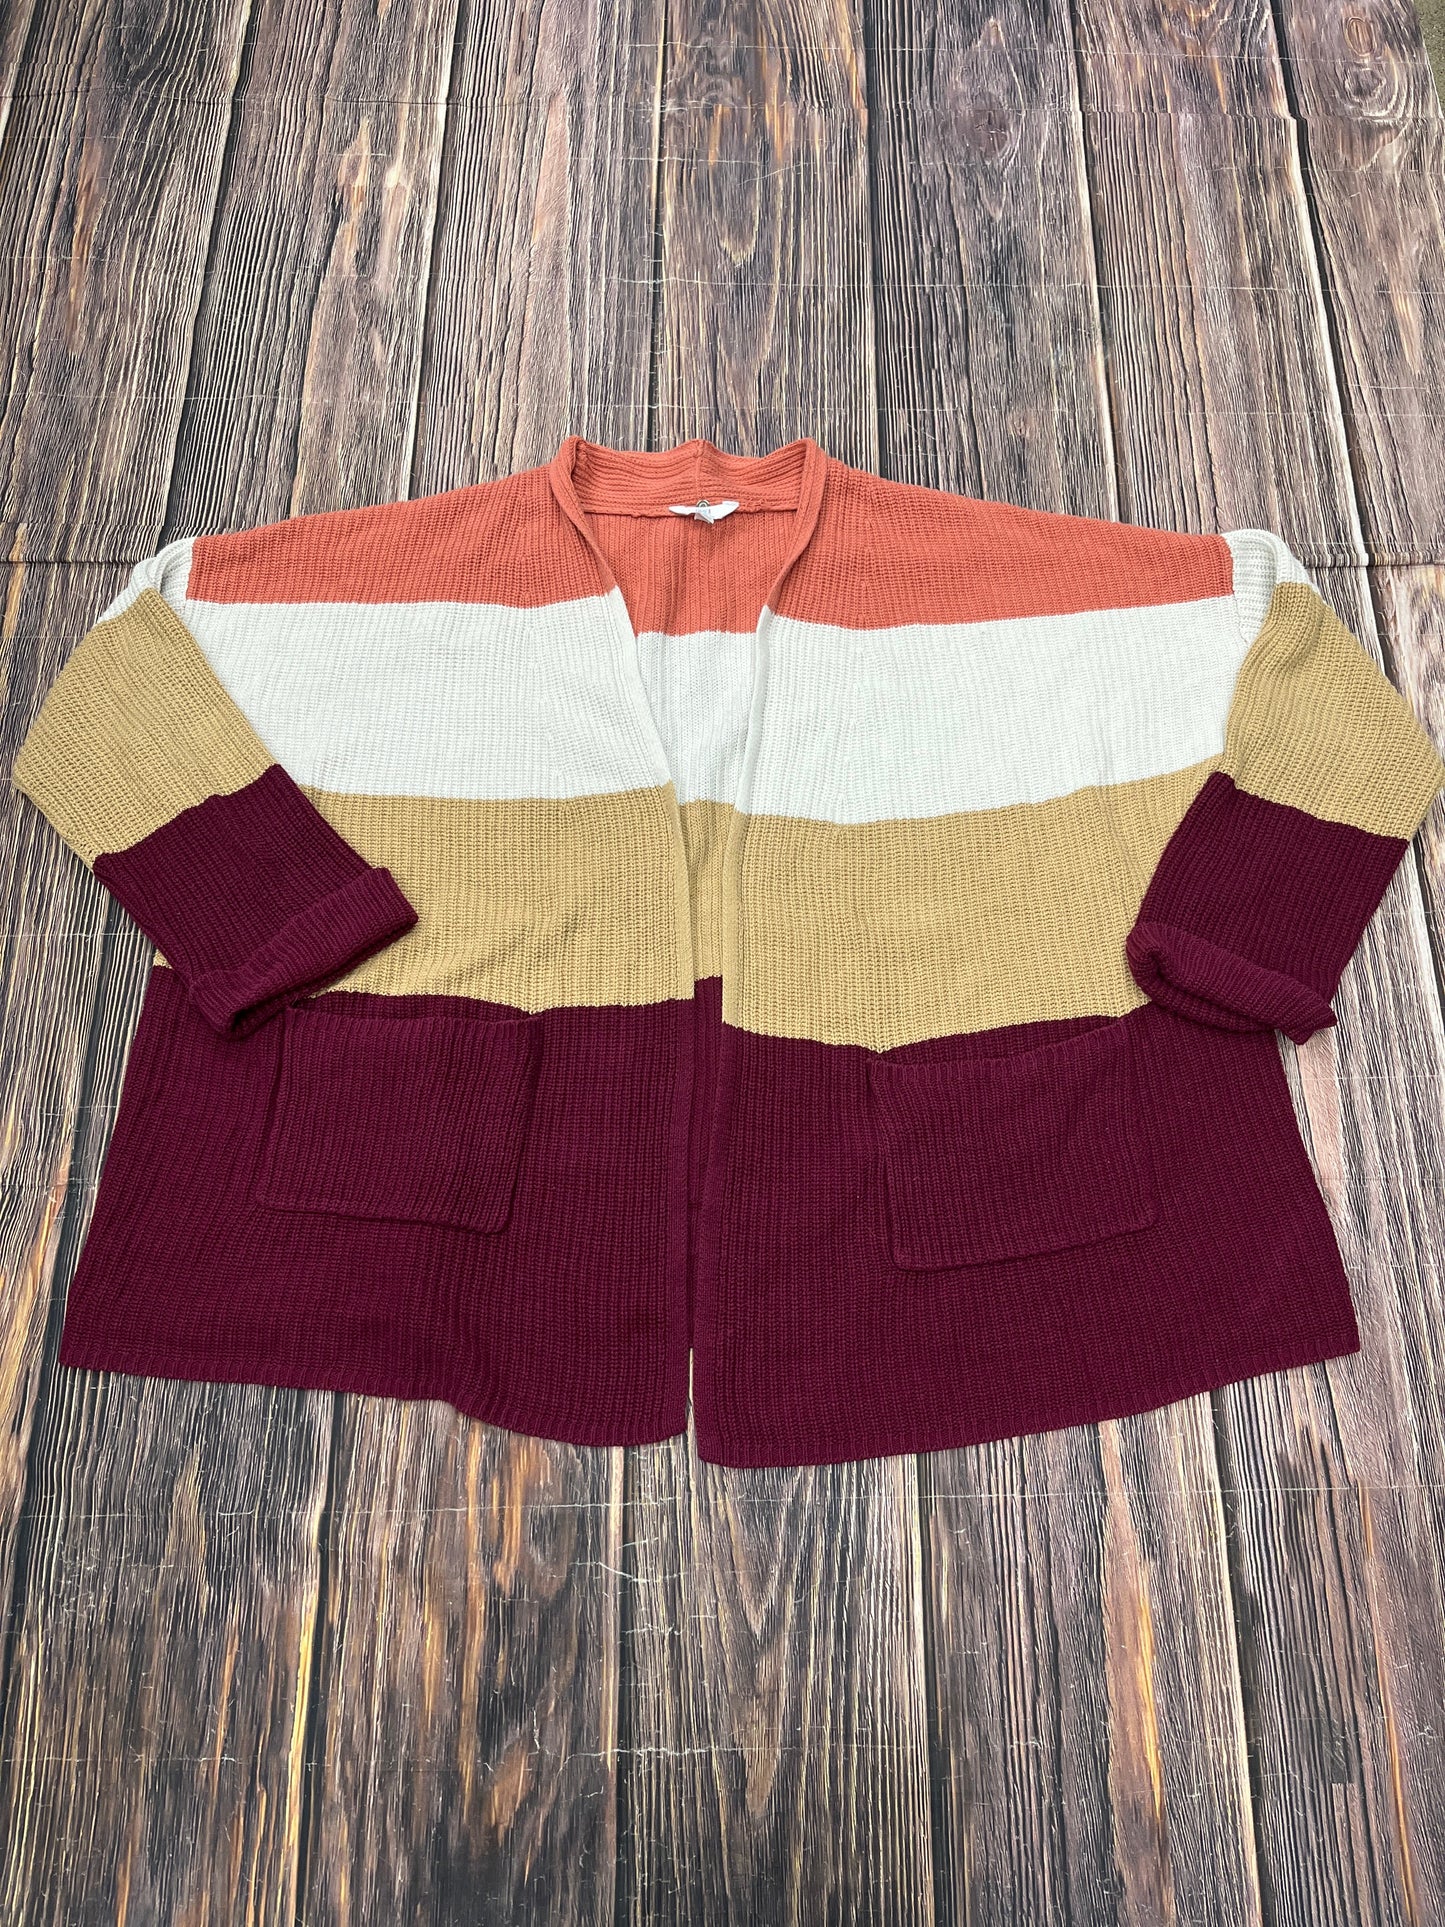 Sweater Cardigan By Time And Tru  Size: Xl